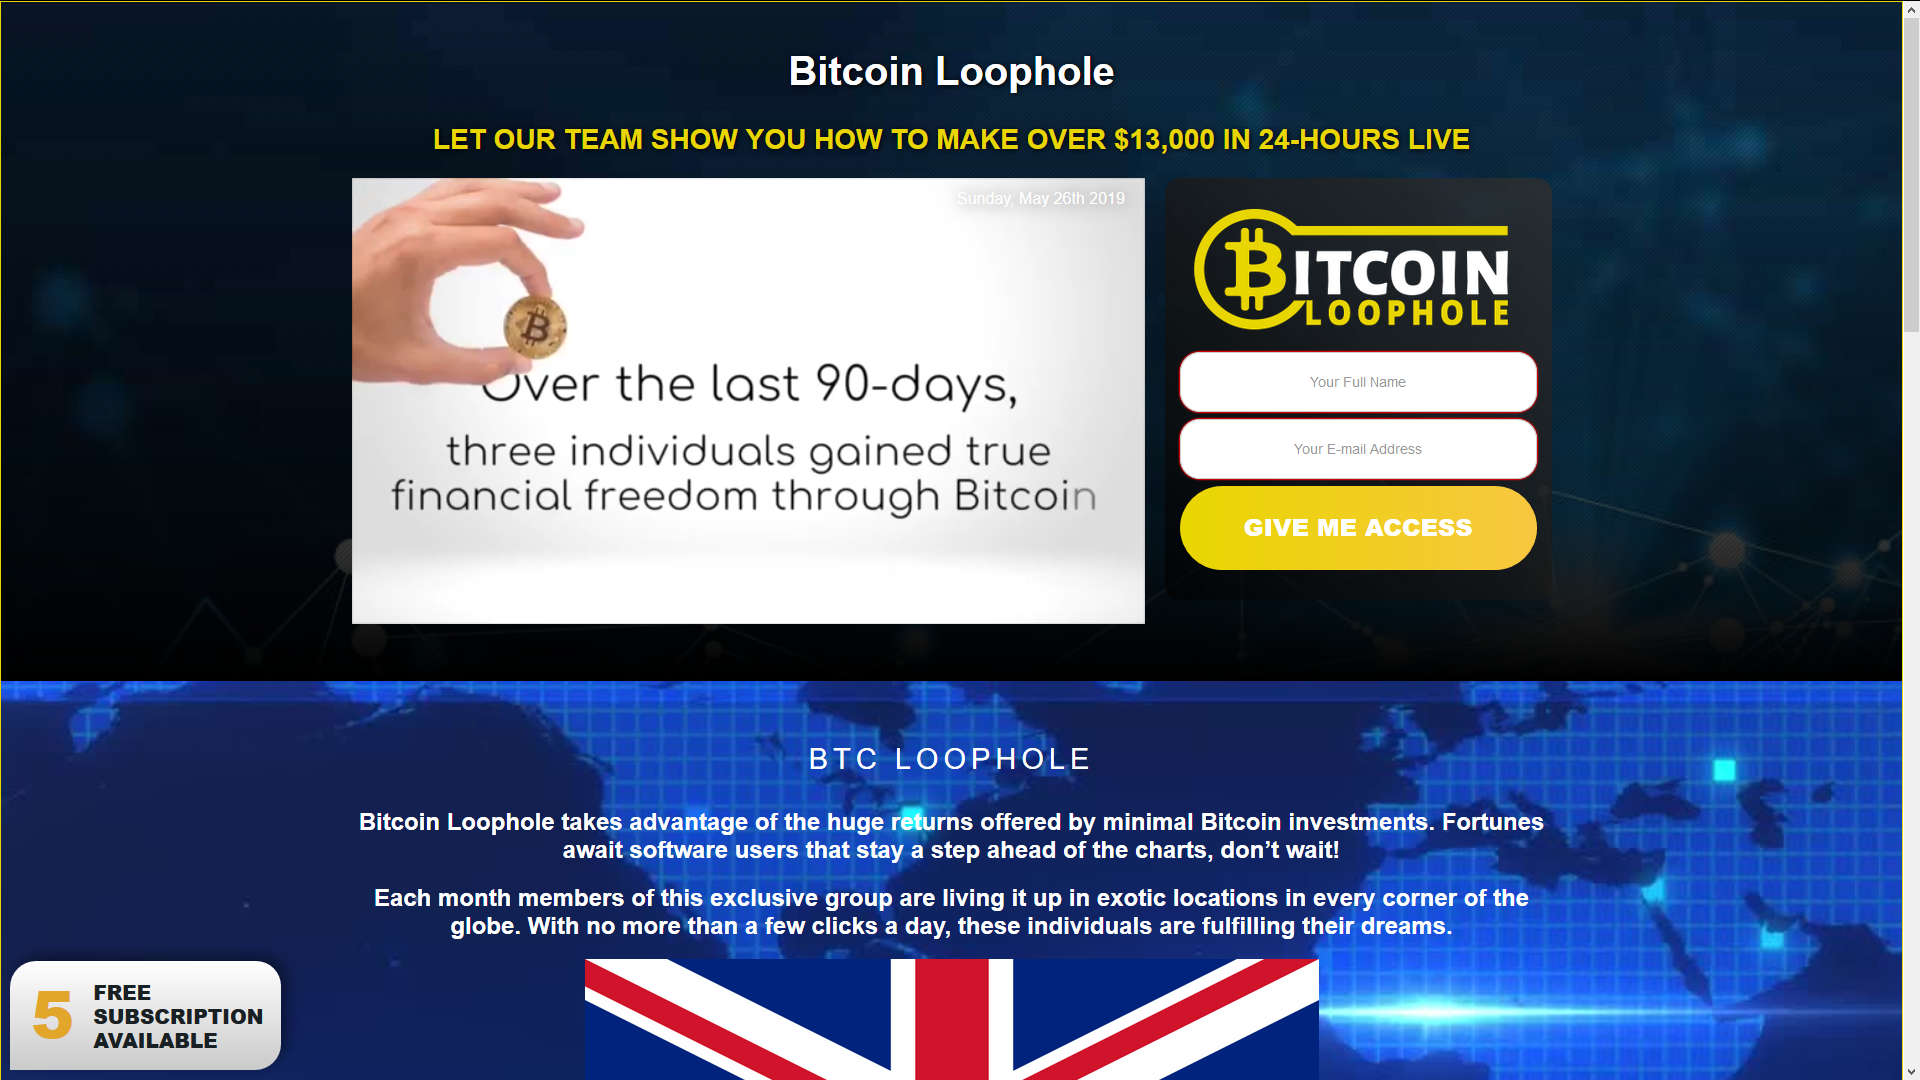 Bitcoin Loophole Review 2021 - Scam or Safe? Complete Check!